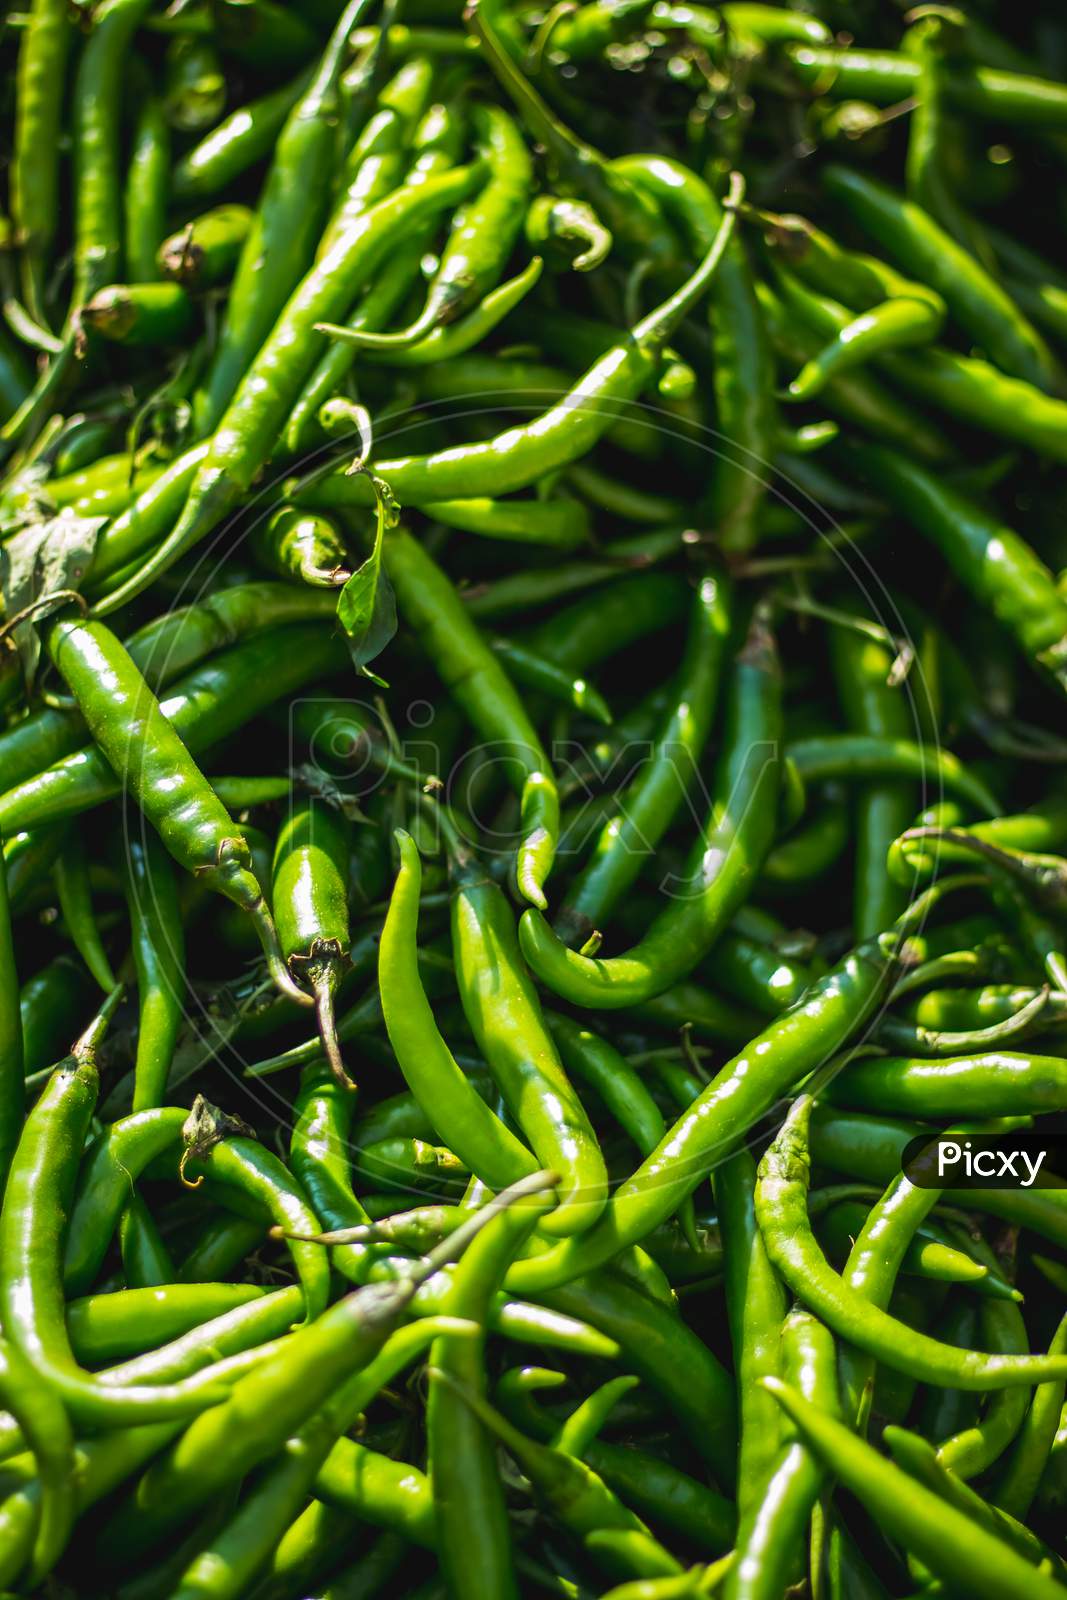 Green Chilli Peppers For Sale At Street Market. Green Chillis Freshly Plucked At The Farm. Fresh Produce Market With Close-Up View Of Pile Of Green Chilli Peppers